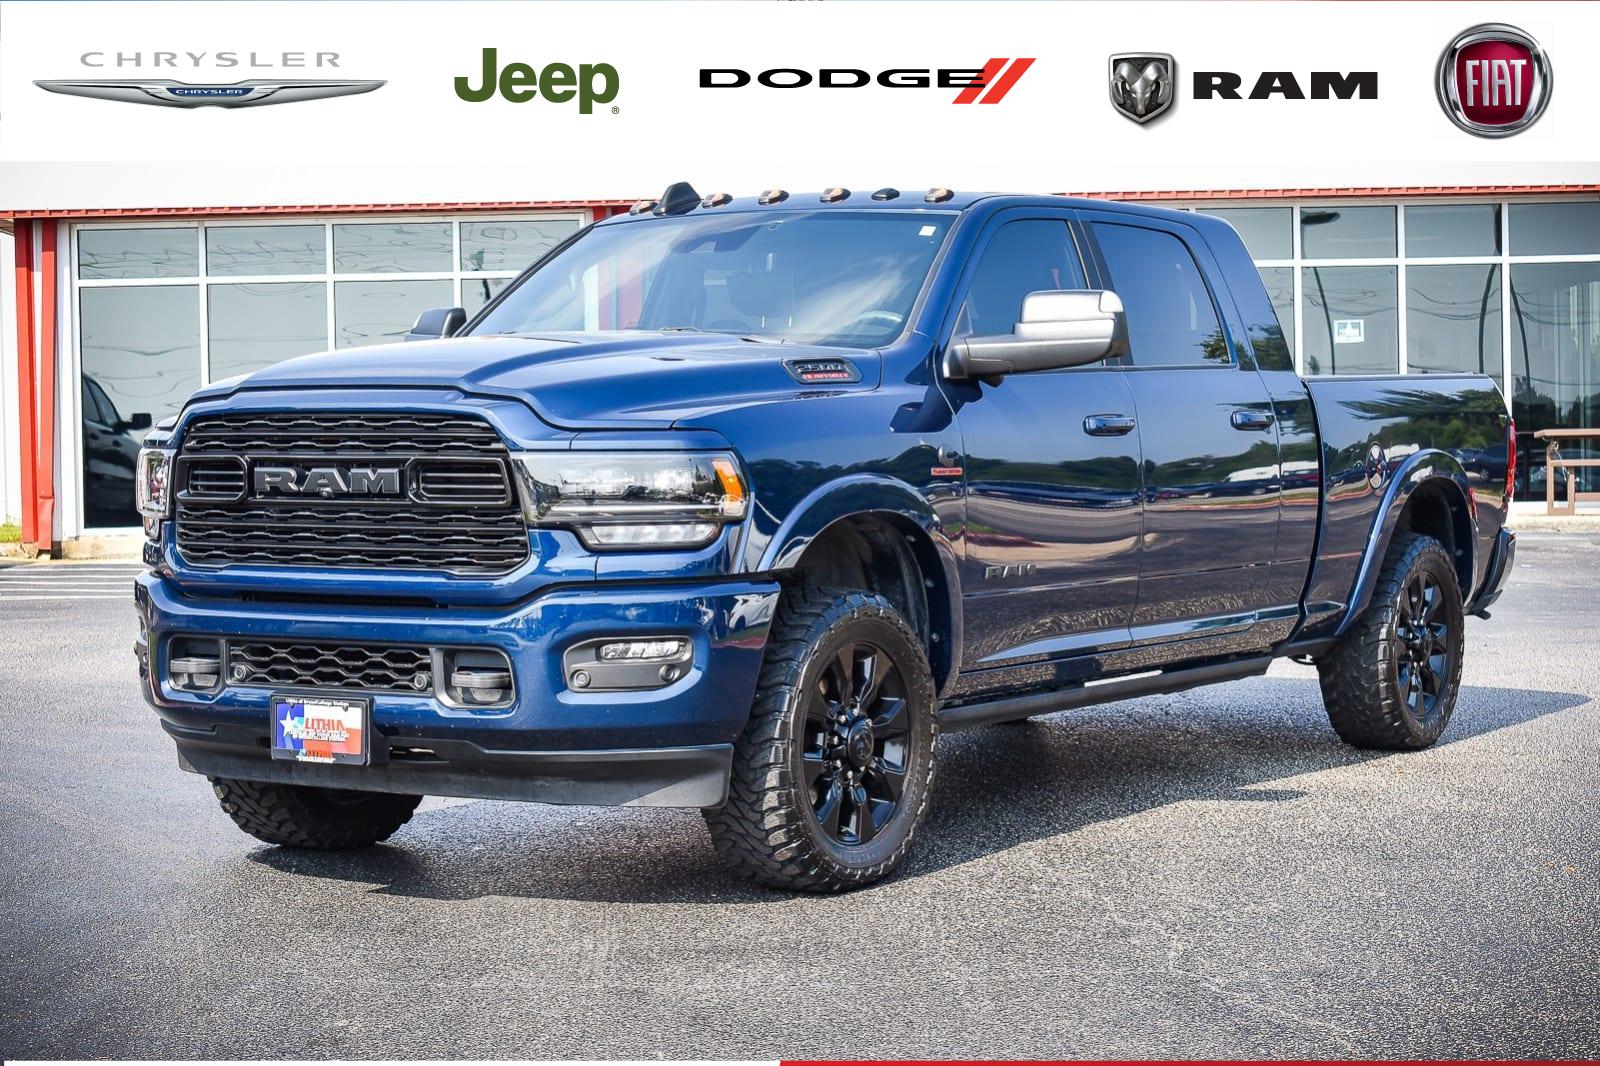 Used 2022 Ram 2500 Limited Truck Mega Cab Patriot Blue Pearlcoat For Sale  Near Temple, Tx | Stock: 23396Tc